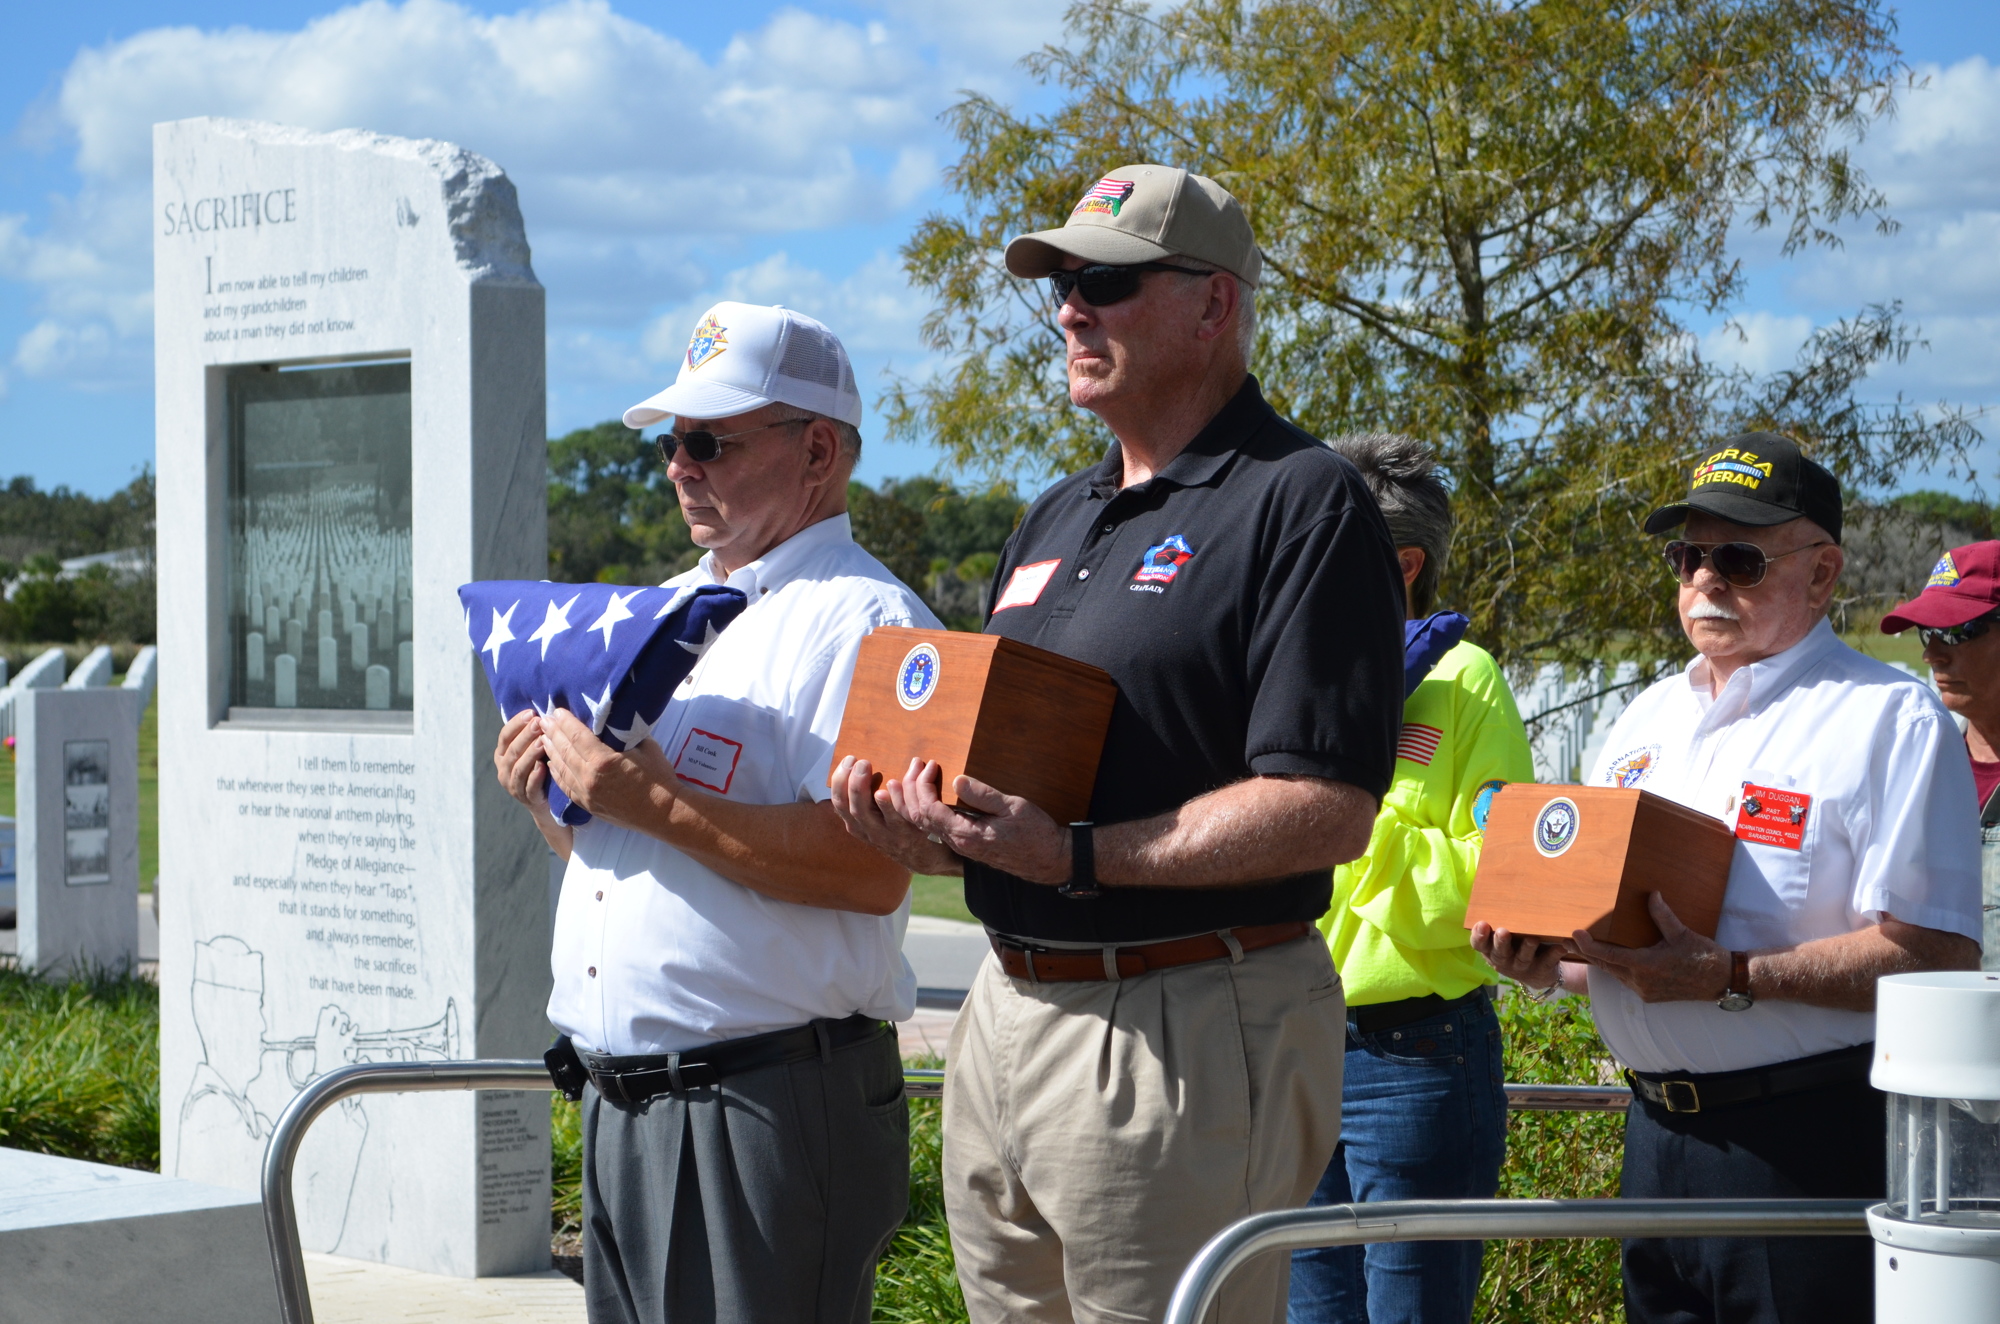 Bill Cook and Ted Smith lead the group of volunteers and family members carrying urns.